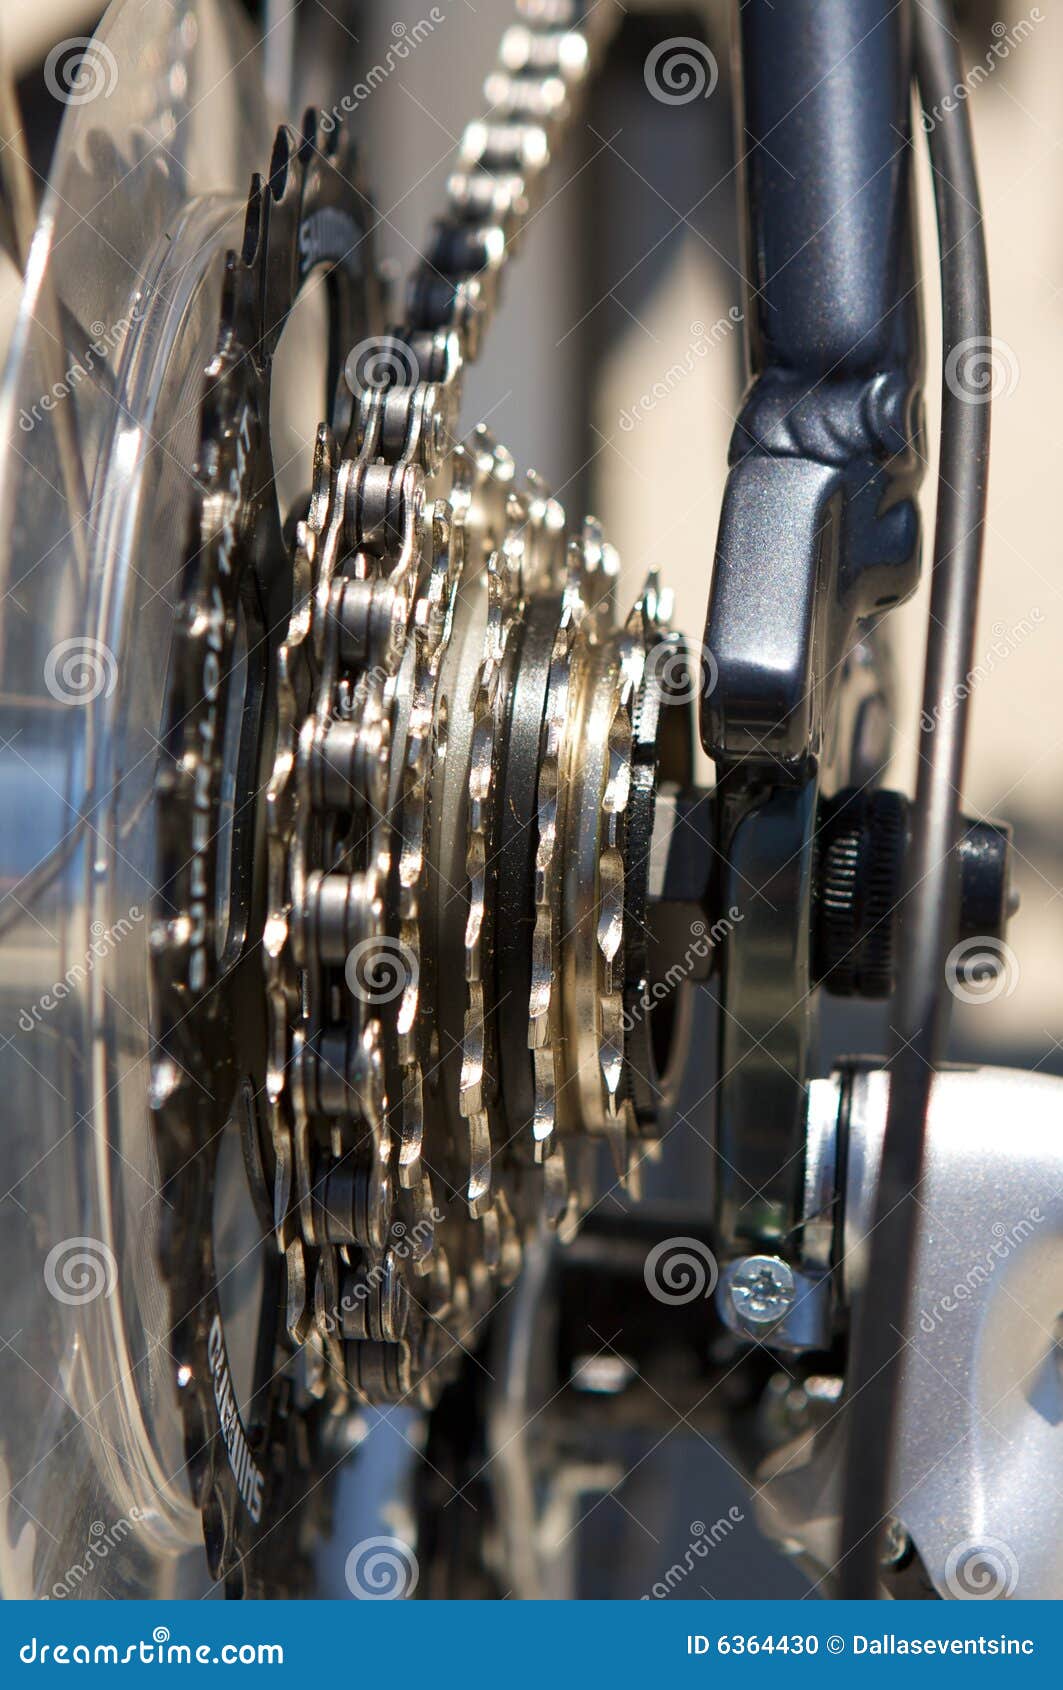 close up of bicycle spokes